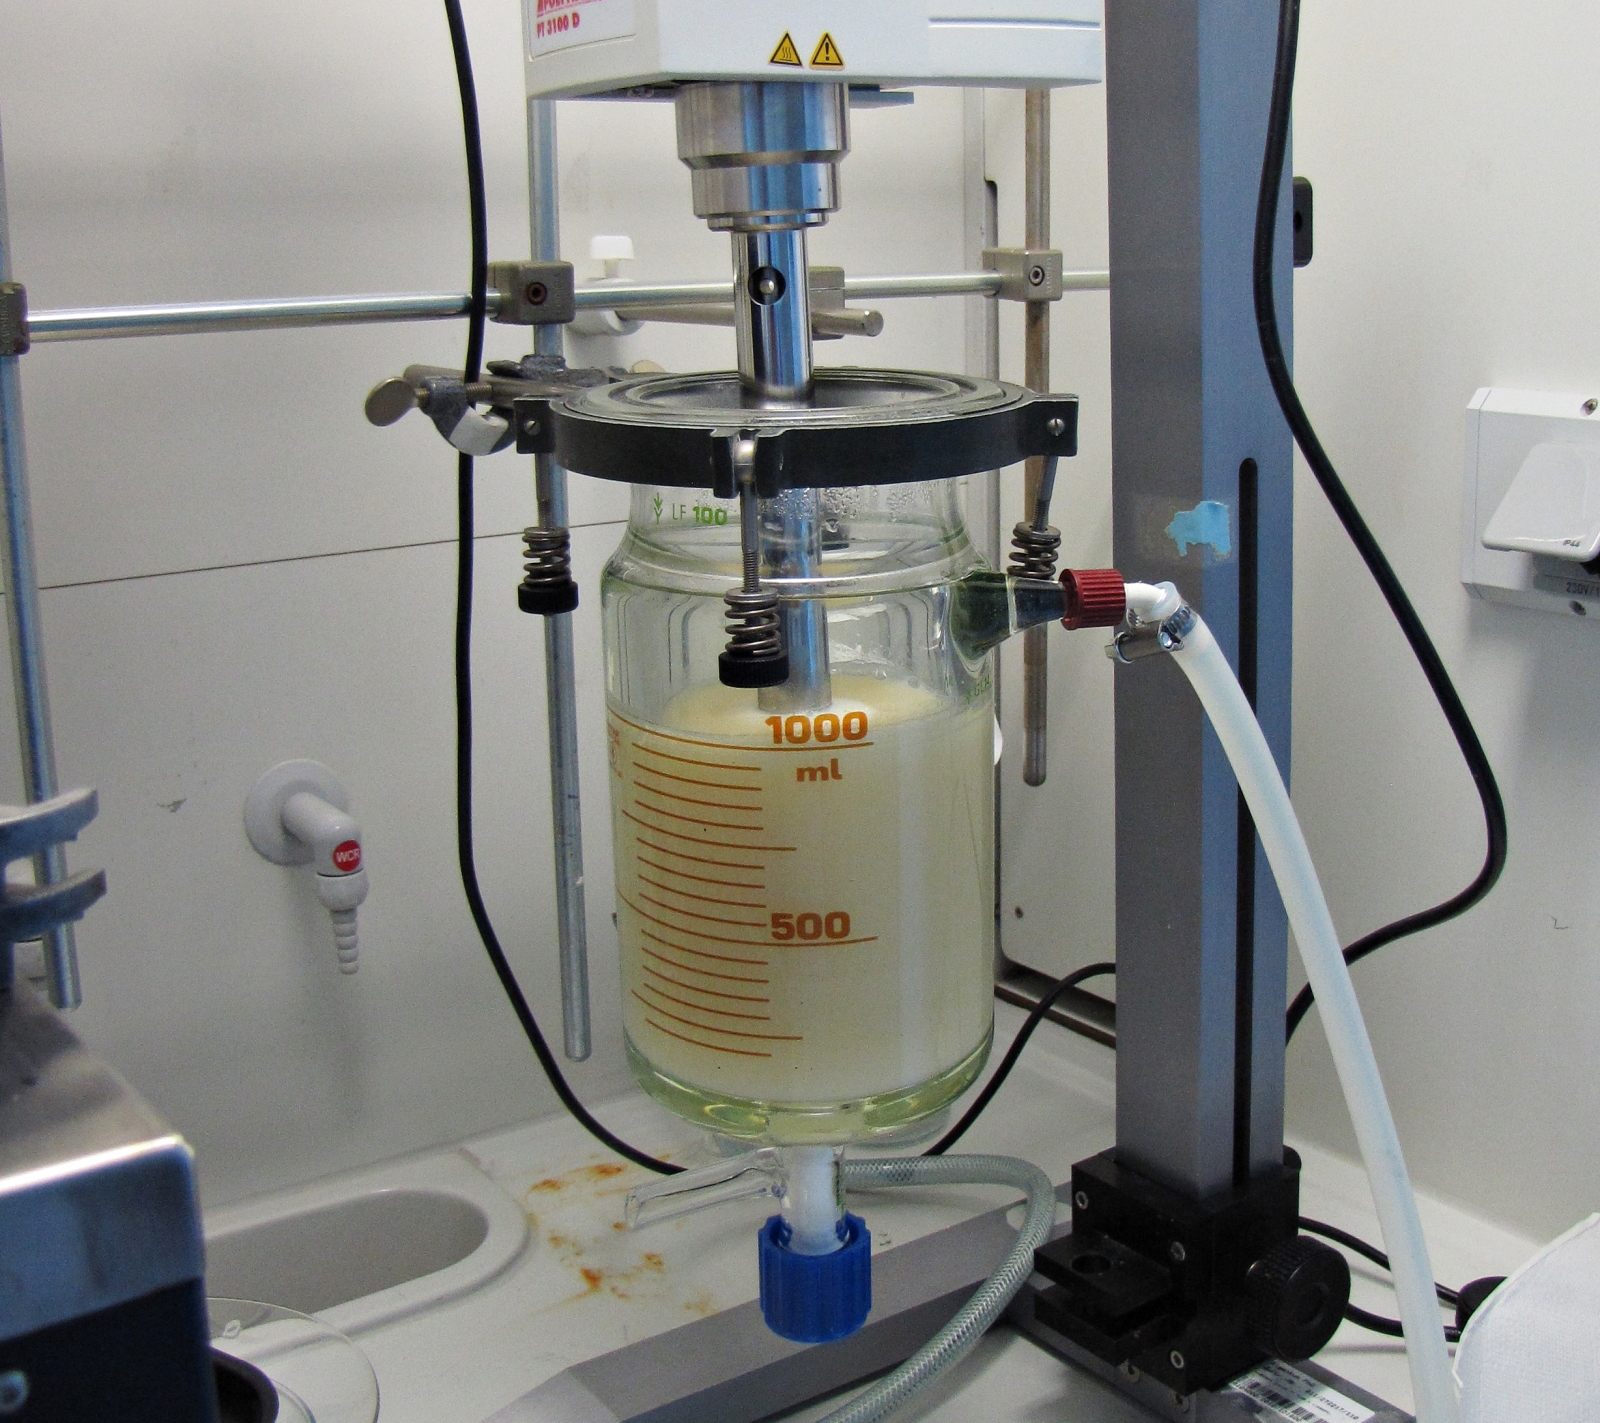 Machine that shows the mixing of wachs, proteines and additives for producing aqueous coating dispersion